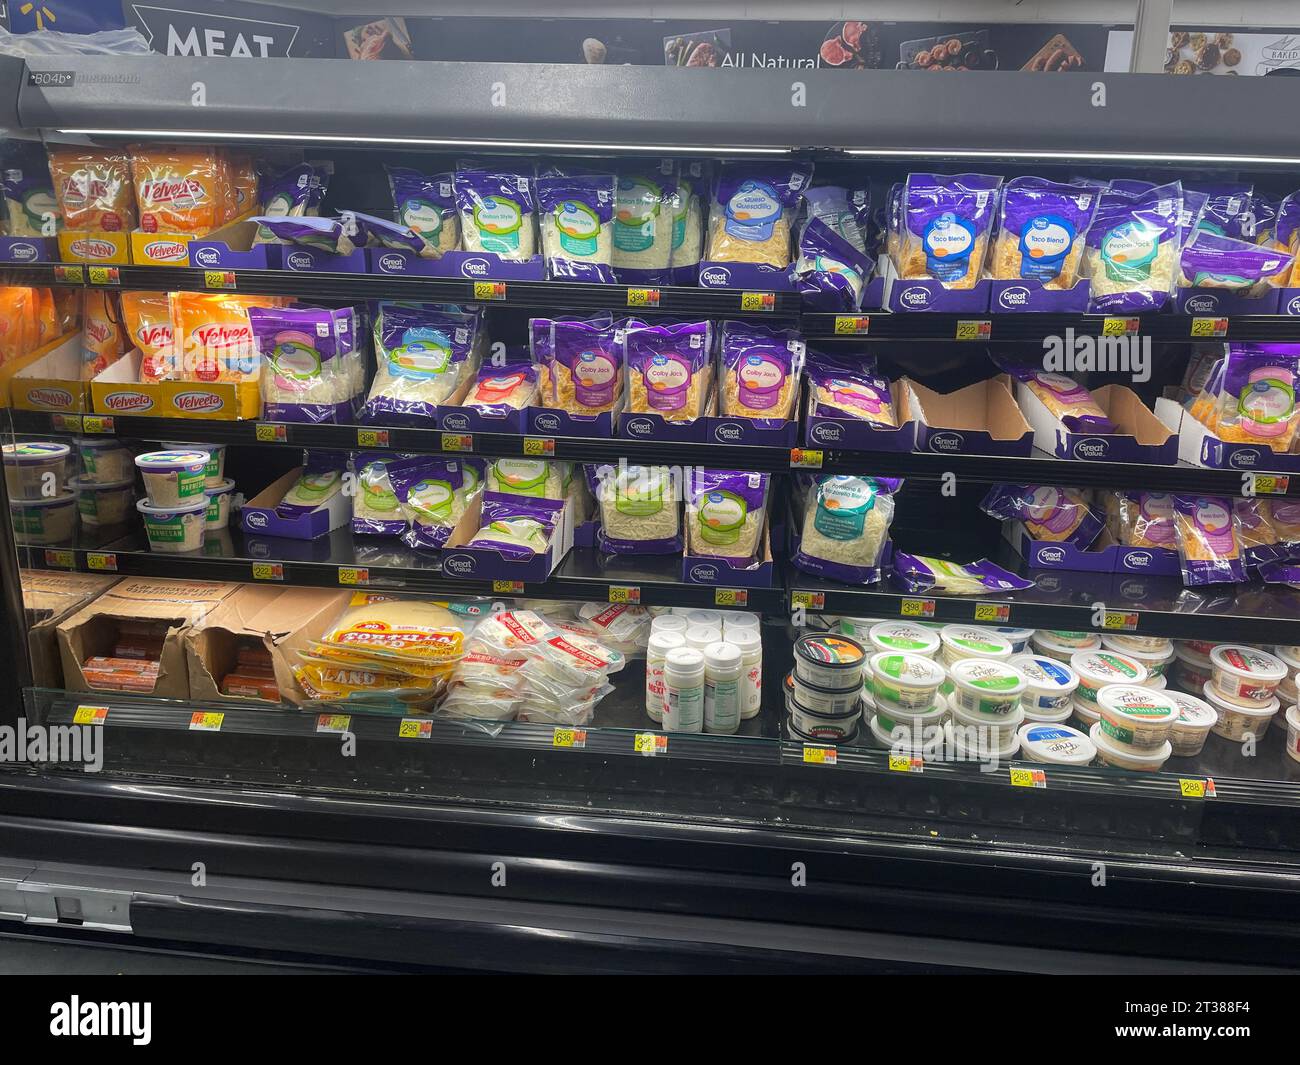 Grovetown, Ga USA - 08 06 23: Walmart grocery store Cheese section and prices Stock Photo